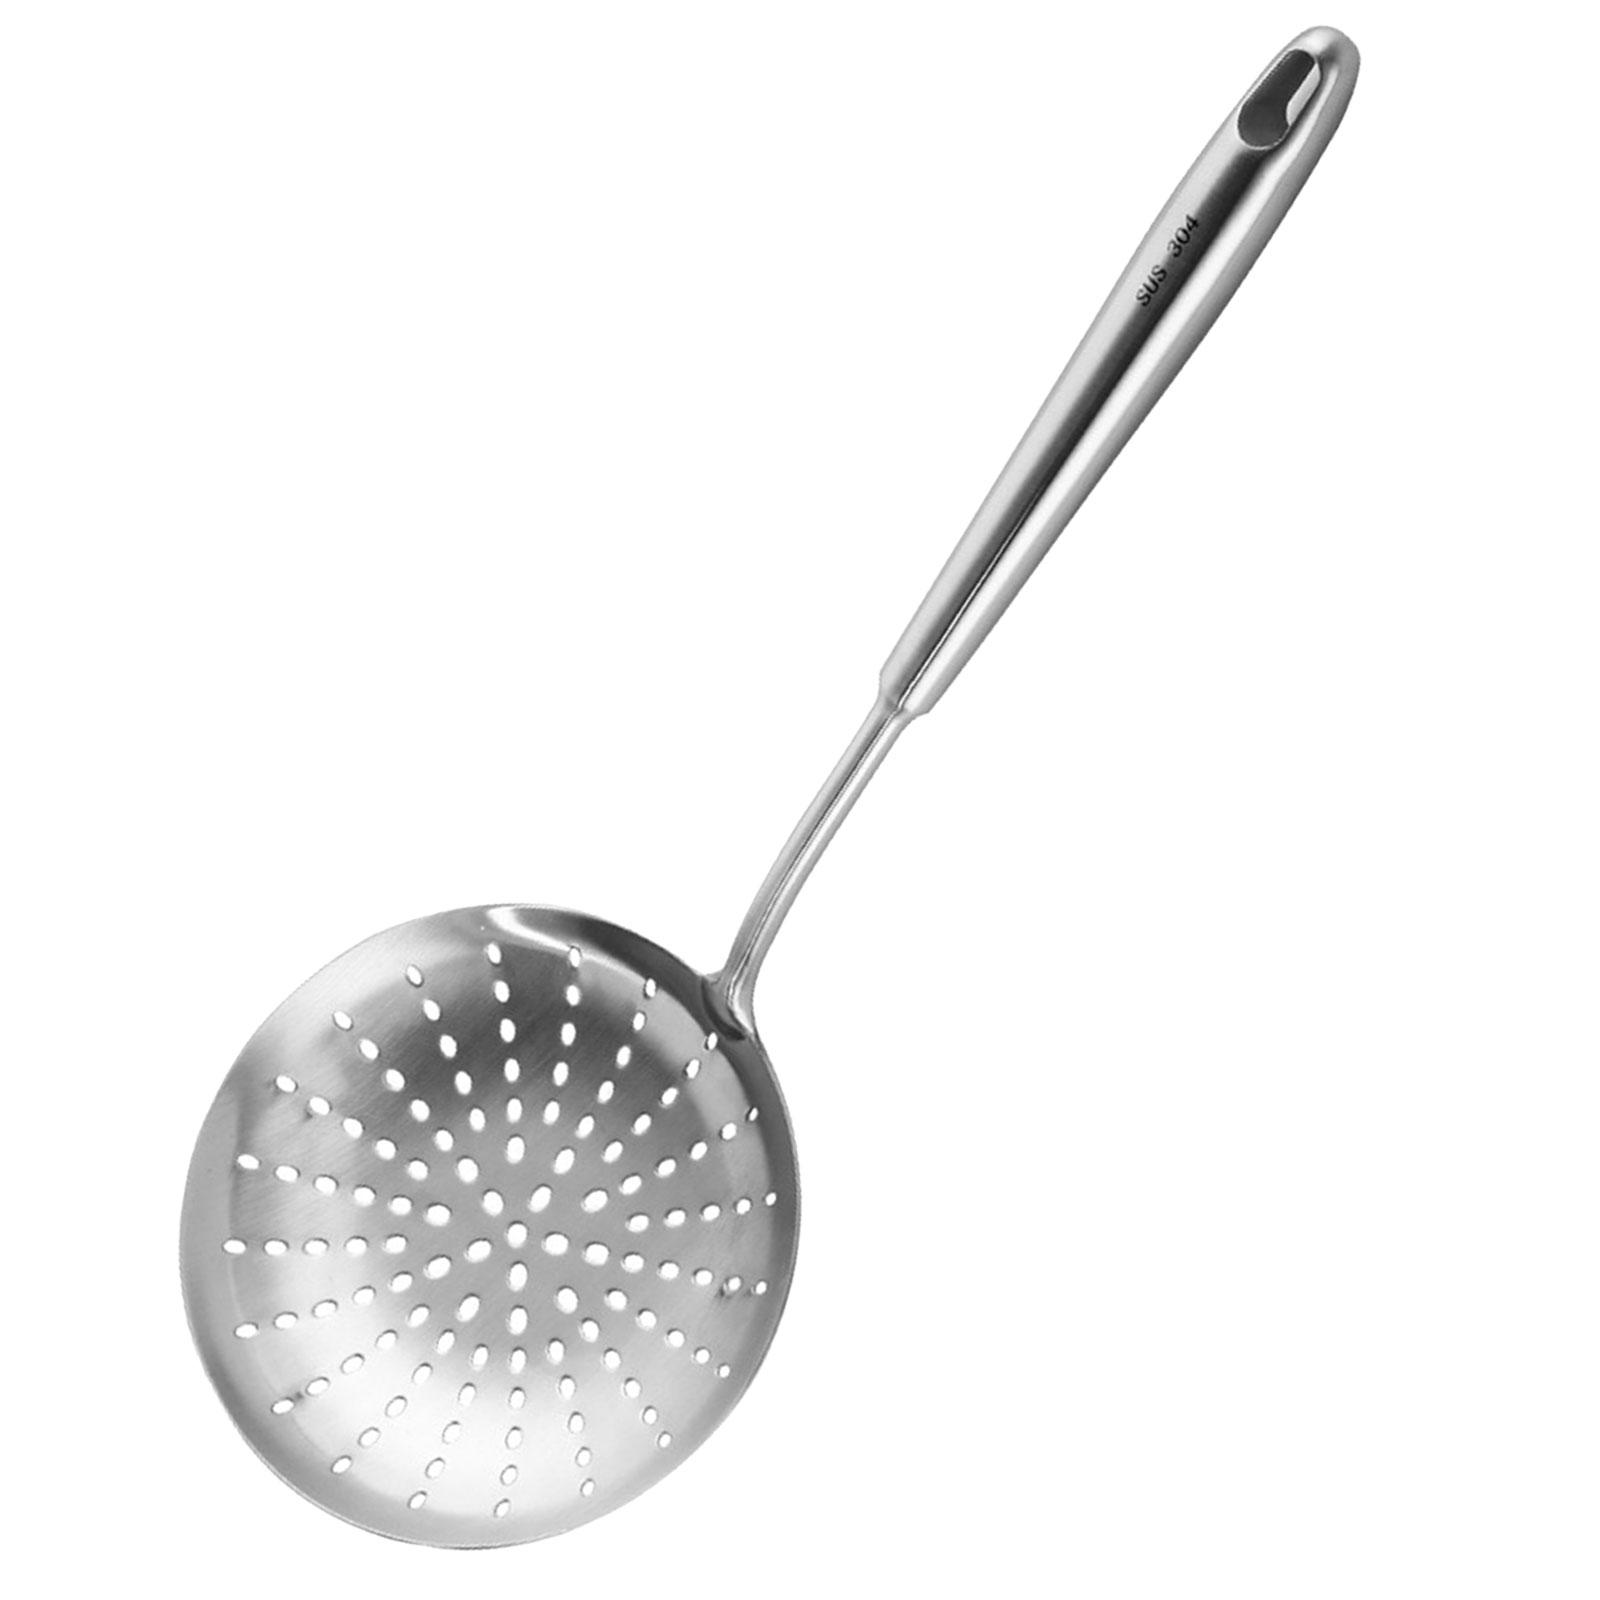 Skimmer Slotted Spoon Stainless Steel Deep Frying Skimmer Spoon for Scooping - image 1 of 9